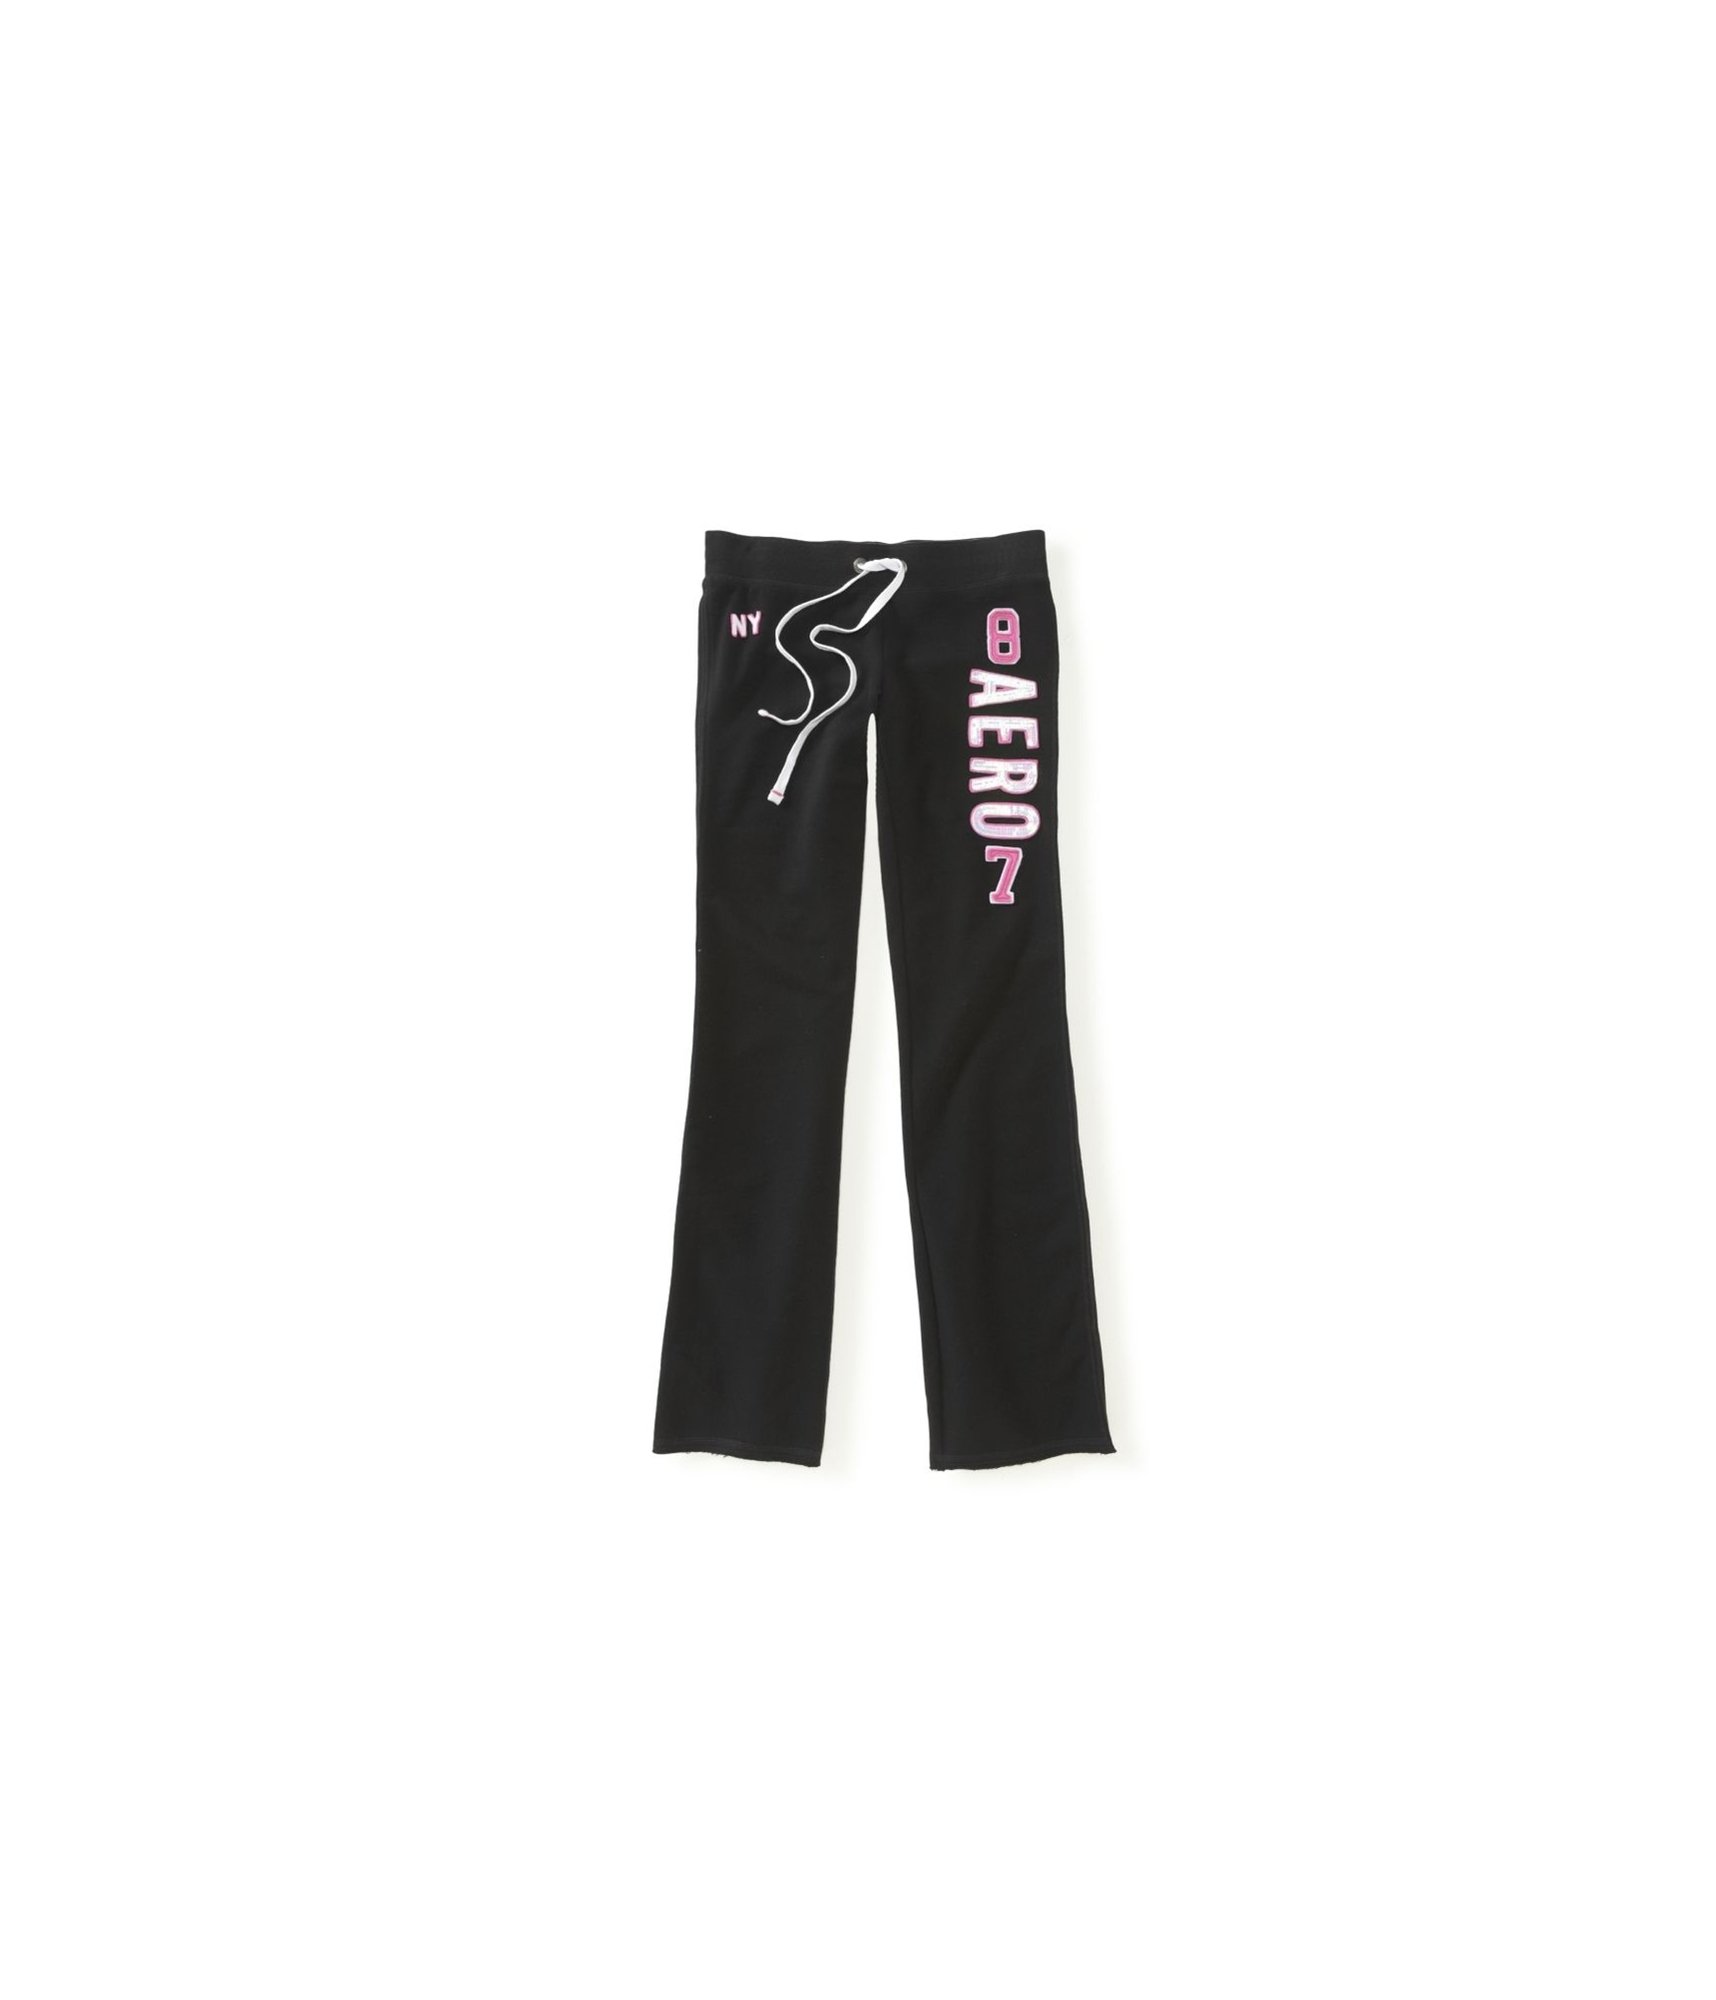 Buy a Aeropostale Womens Fit & Flare Athletic Sweatpants, TW8